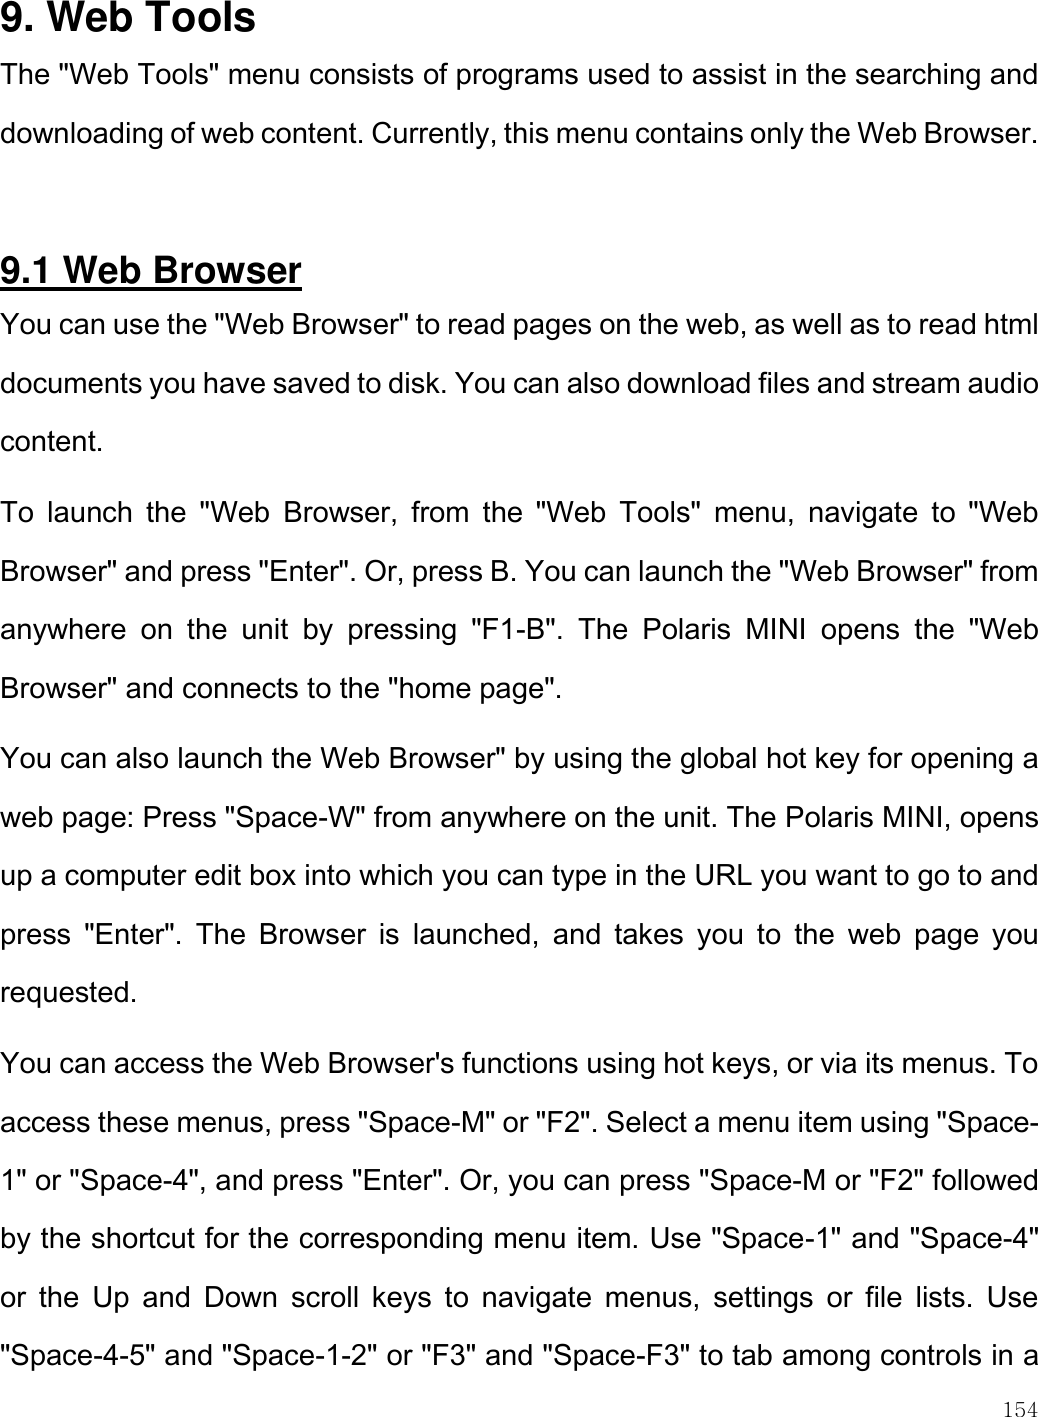    154  9. Web Tools The &quot;Web Tools&quot; menu consists of programs used to assist in the searching and downloading of web content. Currently, this menu contains only the Web Browser.   9.1 Web Browser You can use the &quot;Web Browser&quot; to read pages on the web, as well as to read html documents you have saved to disk. You can also download files and stream audio content.  To  launch  the  &quot;Web  Browser,  from  the  &quot;Web  Tools&quot;  menu,  navigate  to  &quot;Web Browser&quot; and press &quot;Enter&quot;. Or, press B. You can launch the &quot;Web Browser&quot; from anywhere  on  the  unit  by  pressing  &quot;F1-B&quot;.  The  Polaris  MINI  opens  the  &quot;Web Browser&quot; and connects to the &quot;home page&quot;.  You can also launch the Web Browser&quot; by using the global hot key for opening a web page: Press &quot;Space-W&quot; from anywhere on the unit. The Polaris MINI, opens up a computer edit box into which you can type in the URL you want to go to and press  &quot;Enter&quot;.  The  Browser  is  launched,  and  takes  you  to  the  web  page  you requested. You can access the Web Browser&apos;s functions using hot keys, or via its menus. To access these menus, press &quot;Space-M&quot; or &quot;F2&quot;. Select a menu item using &quot;Space-1&quot; or &quot;Space-4&quot;, and press &quot;Enter&quot;. Or, you can press &quot;Space-M or &quot;F2&quot; followed by the shortcut for the corresponding menu item. Use &quot;Space-1&quot; and &quot;Space-4&quot; or  the  Up  and  Down  scroll  keys  to  navigate  menus,  settings  or  file  lists.  Use &quot;Space-4-5&quot; and &quot;Space-1-2&quot; or &quot;F3&quot; and &quot;Space-F3&quot; to tab among controls in a 